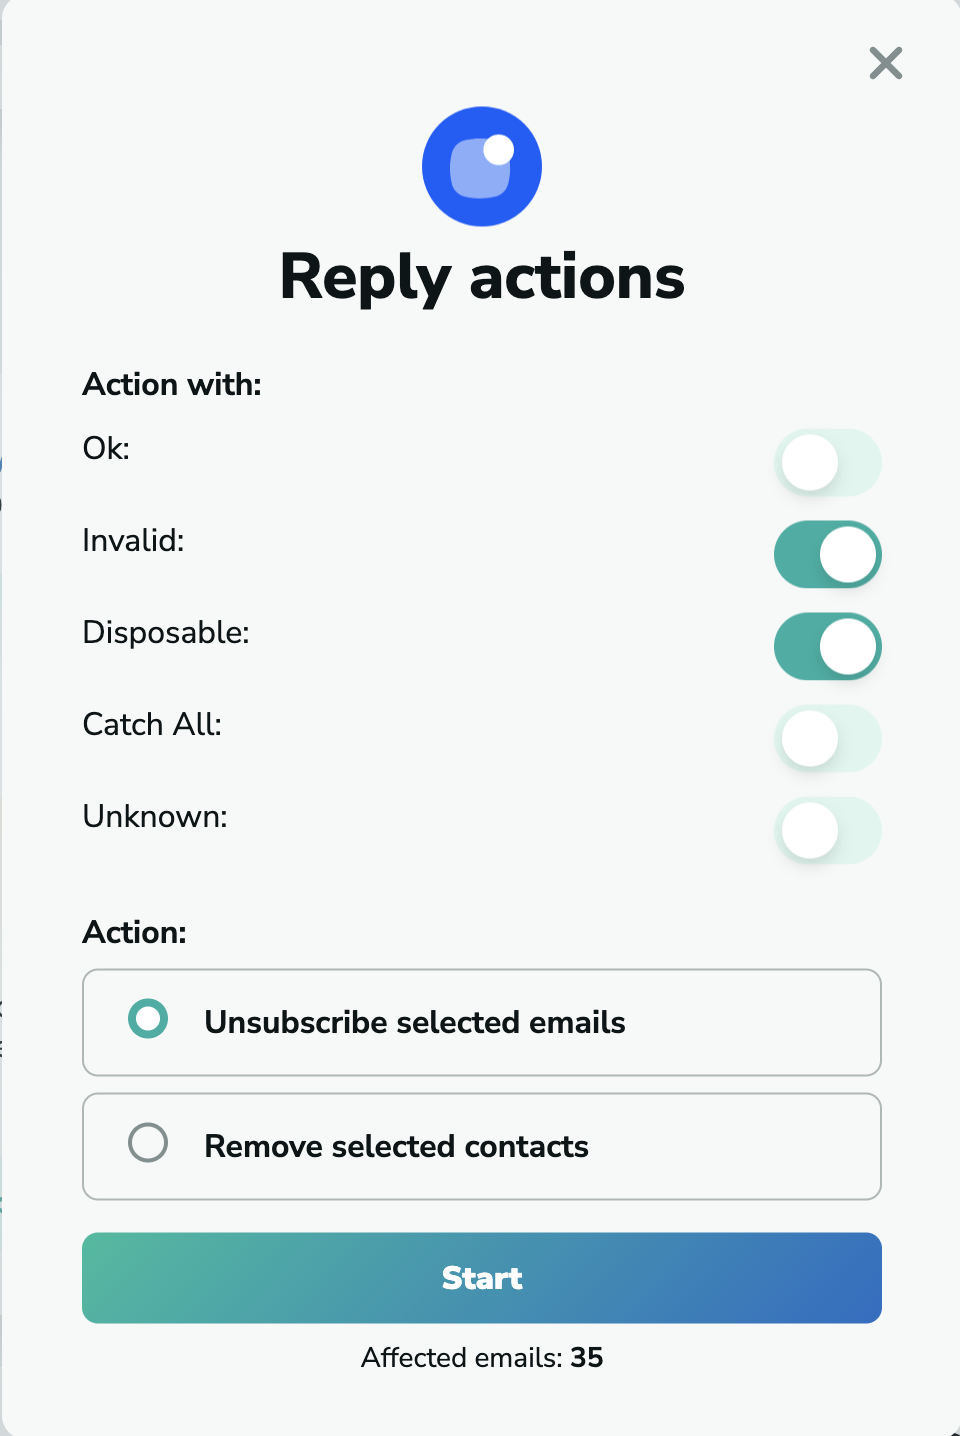 Reply unsubscribe emails in MillionVerifier